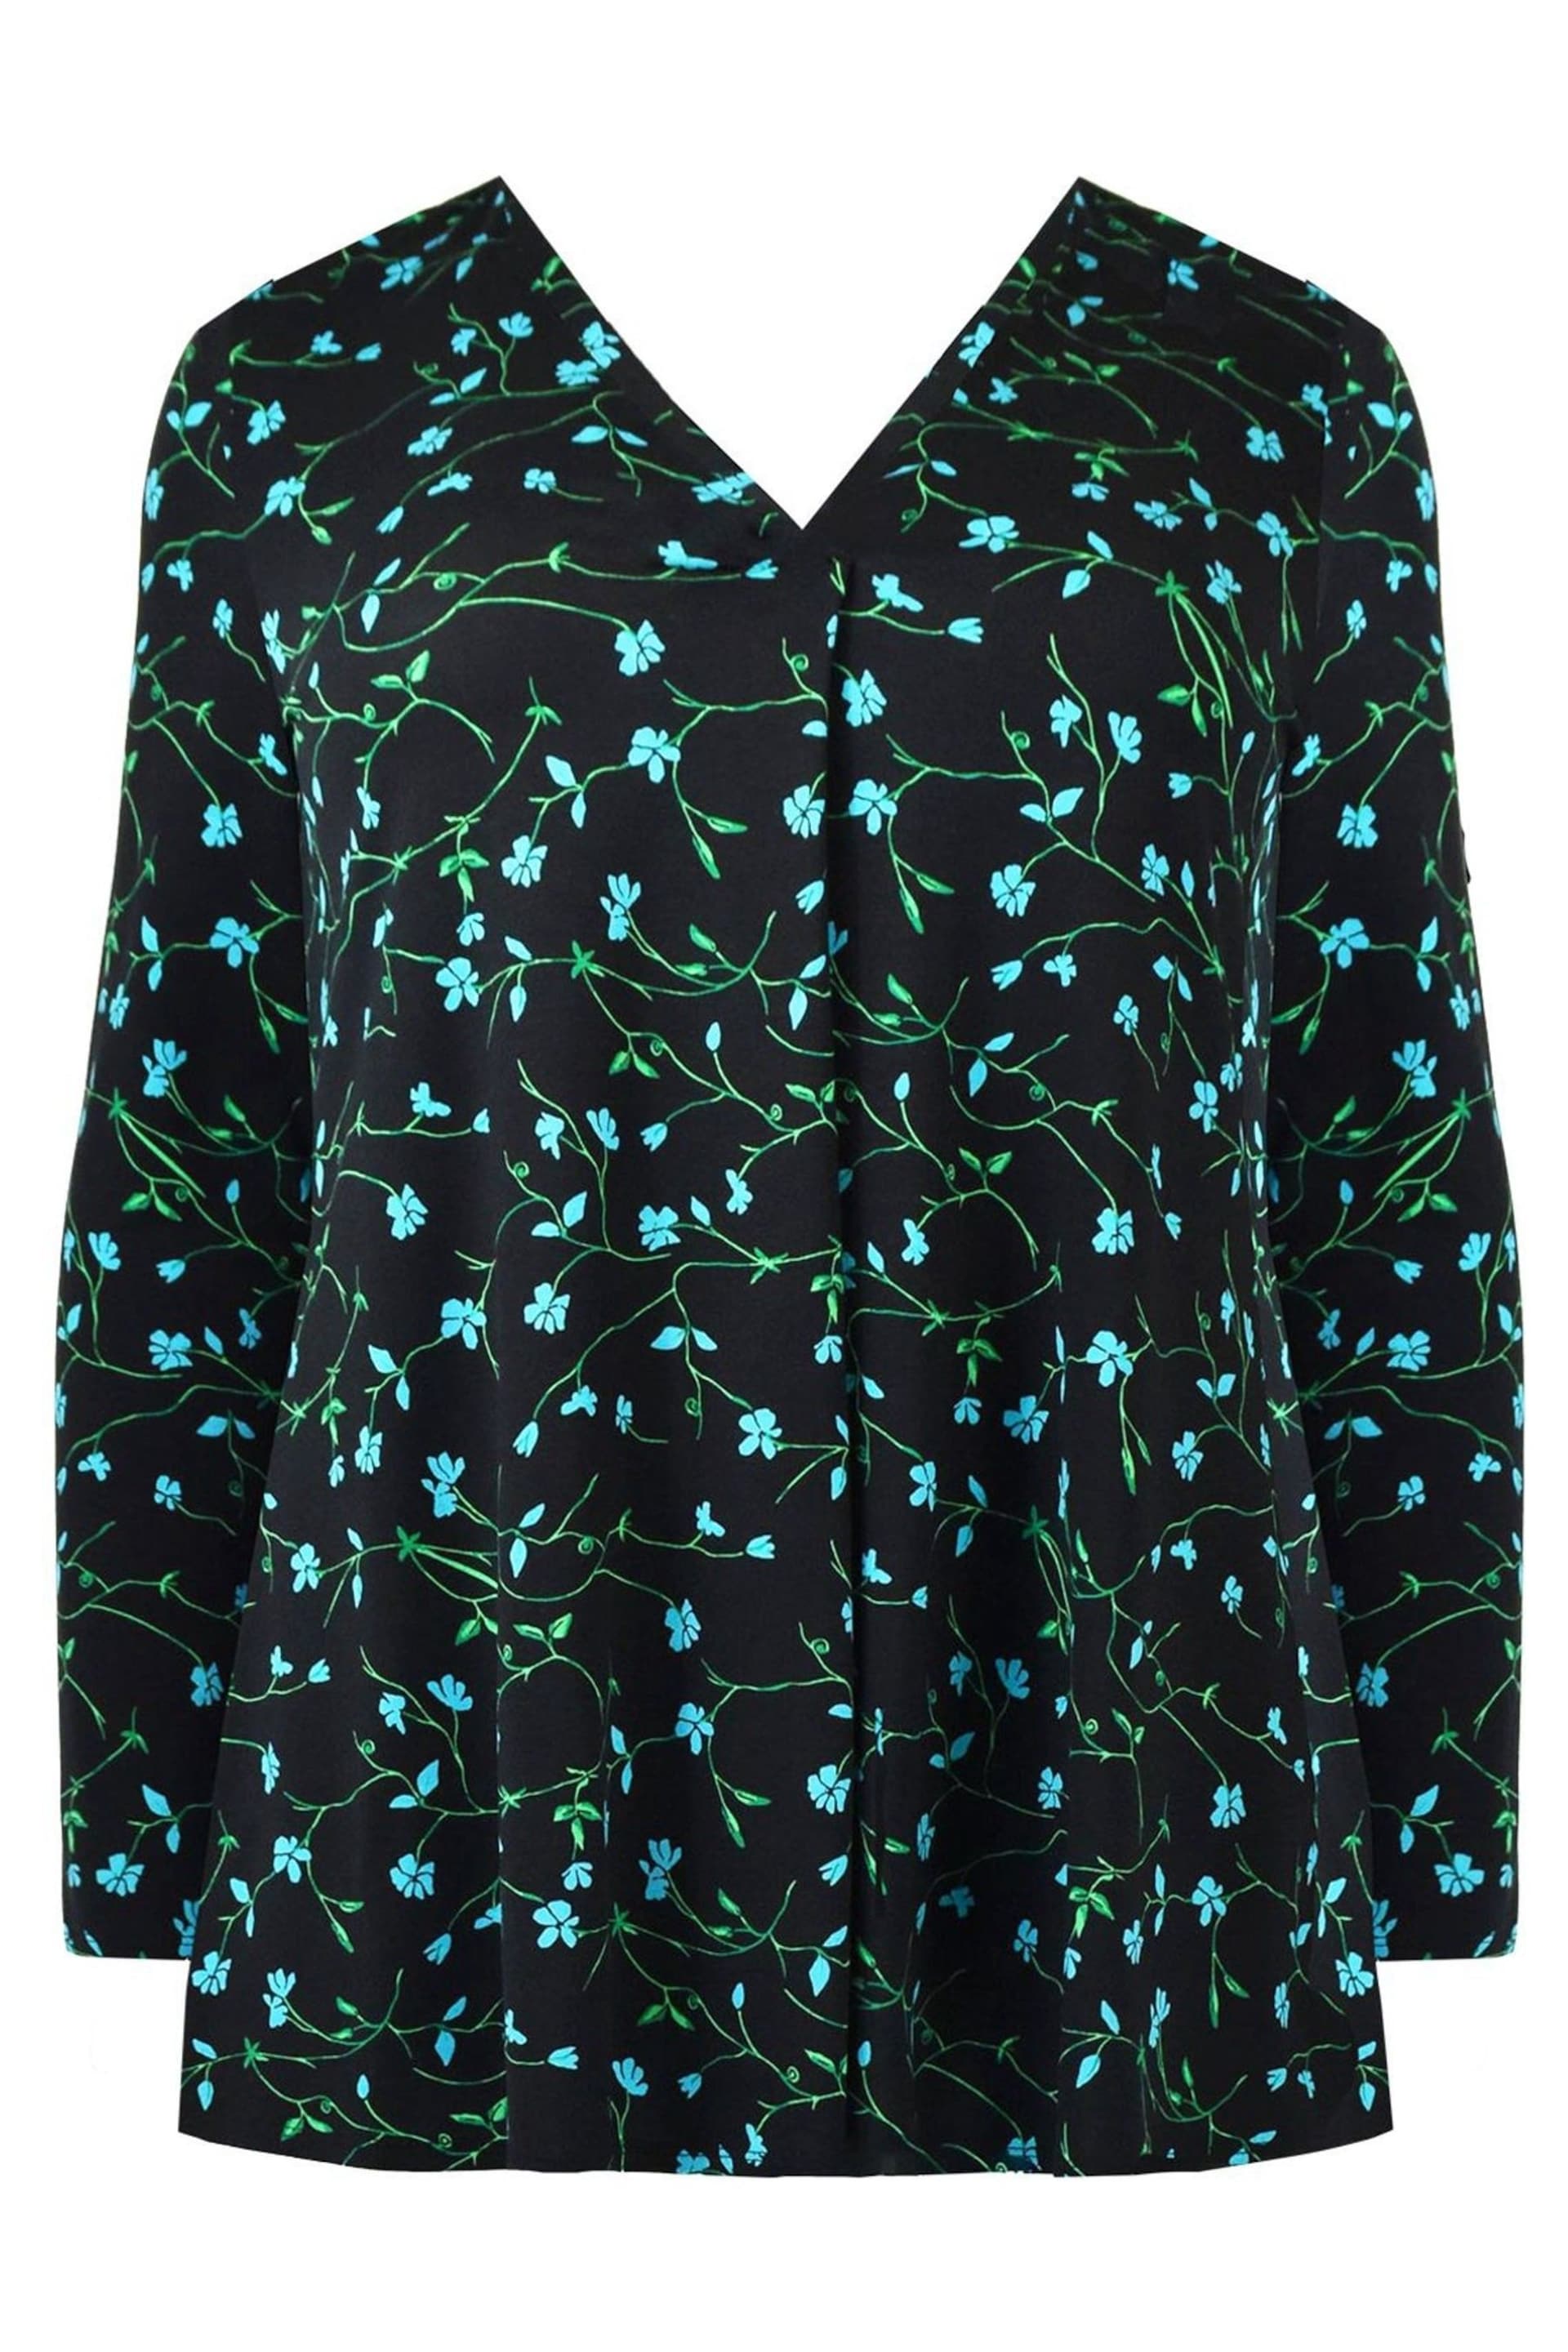 Live Unlimited Curve Blue Ditsy Print Jersey Pleat Front Top - Image 4 of 6